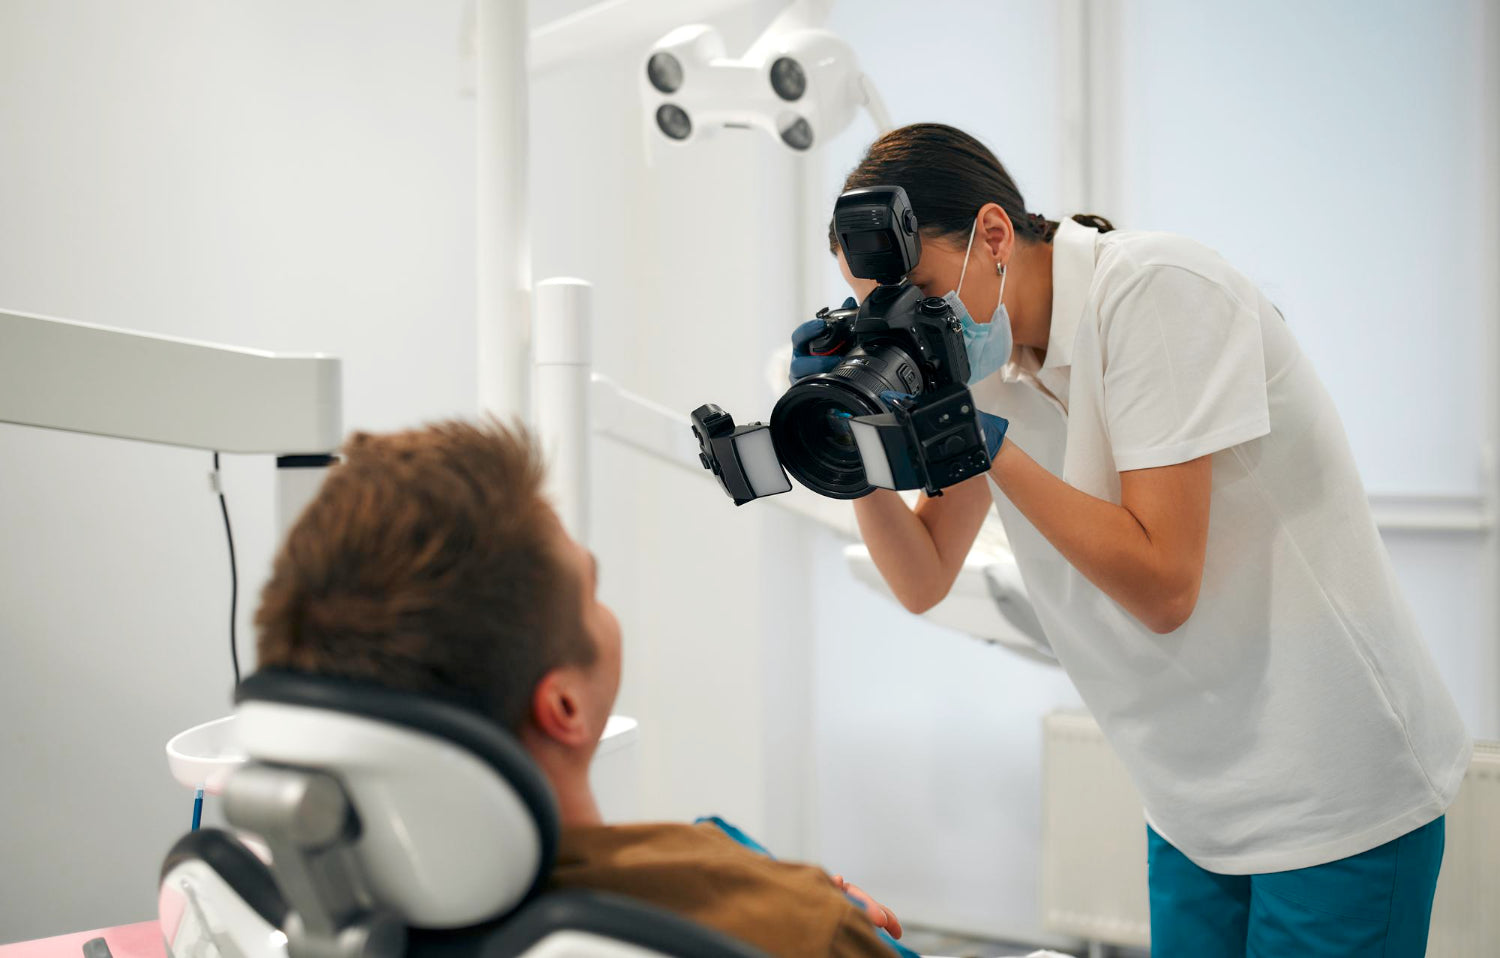 Preparation for a Dental Photo shoot: Using flash and light filters